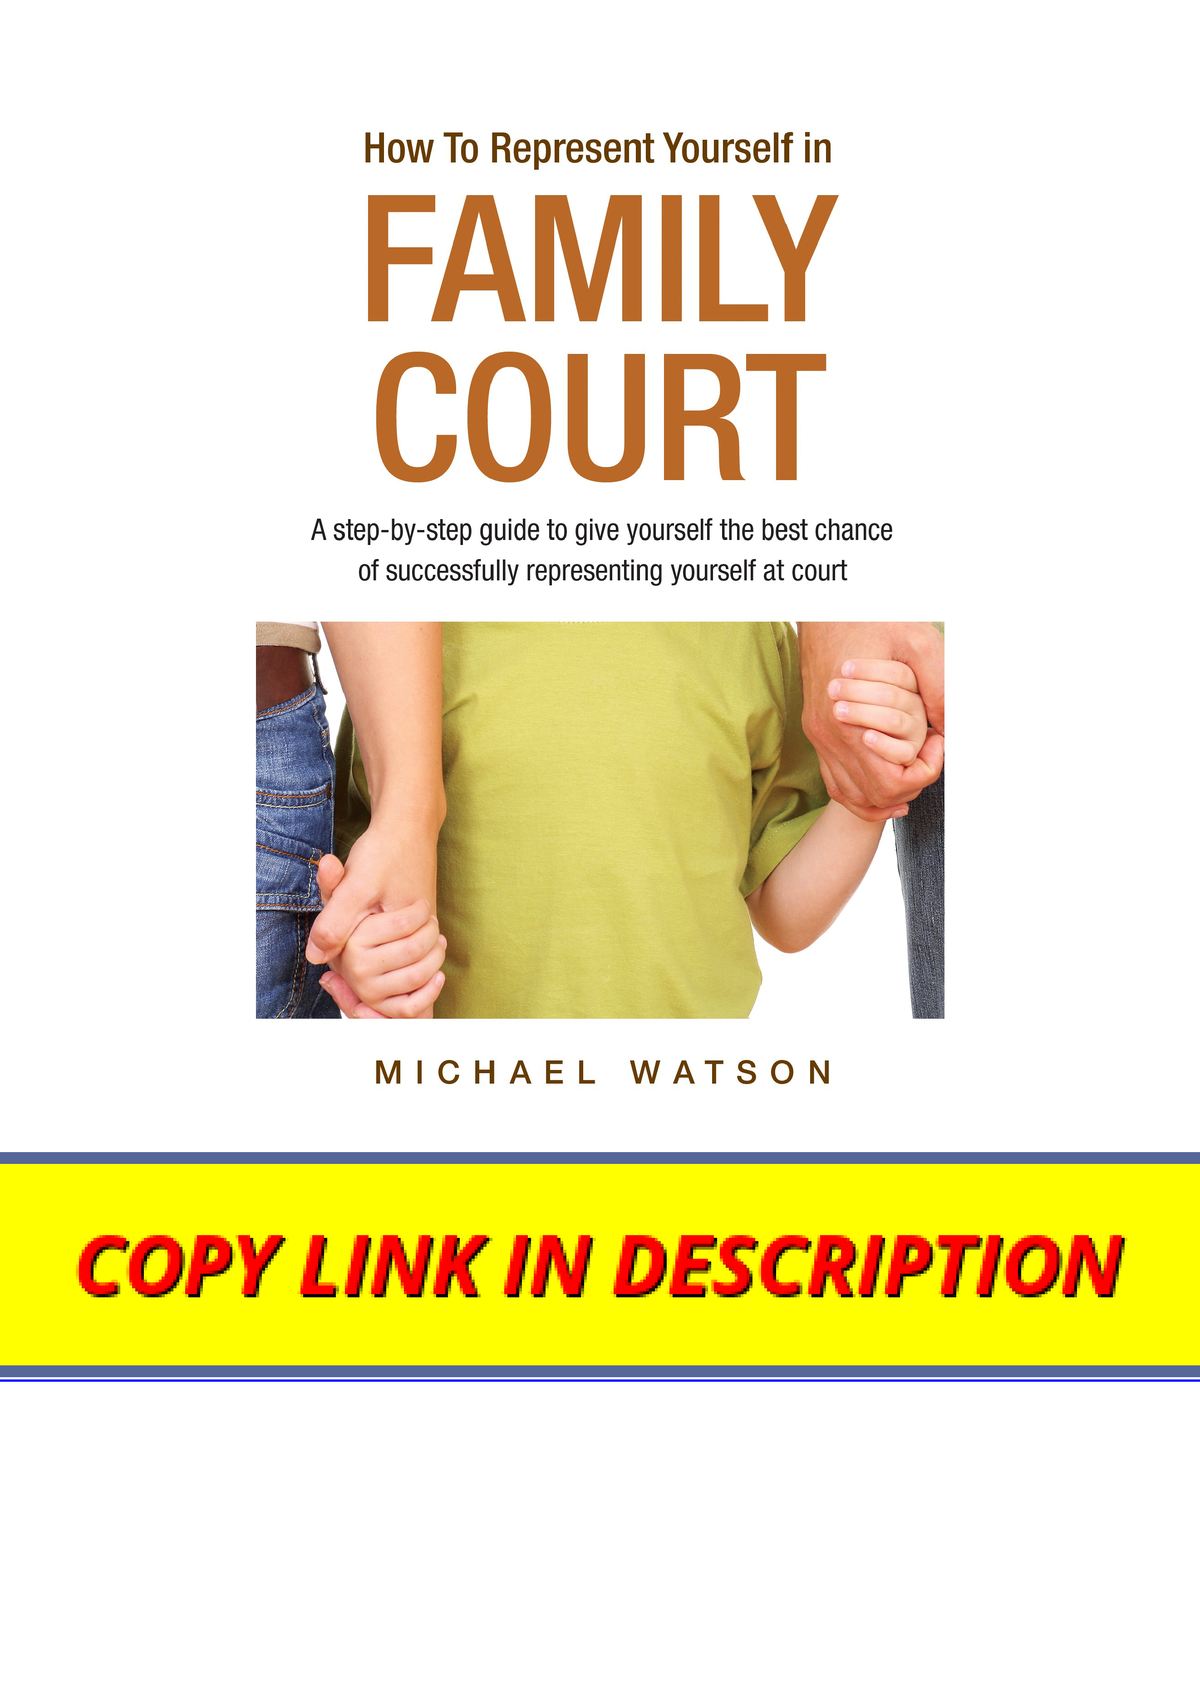 Kindle Online Pdf How To Represent Yourself In Family Court For Android